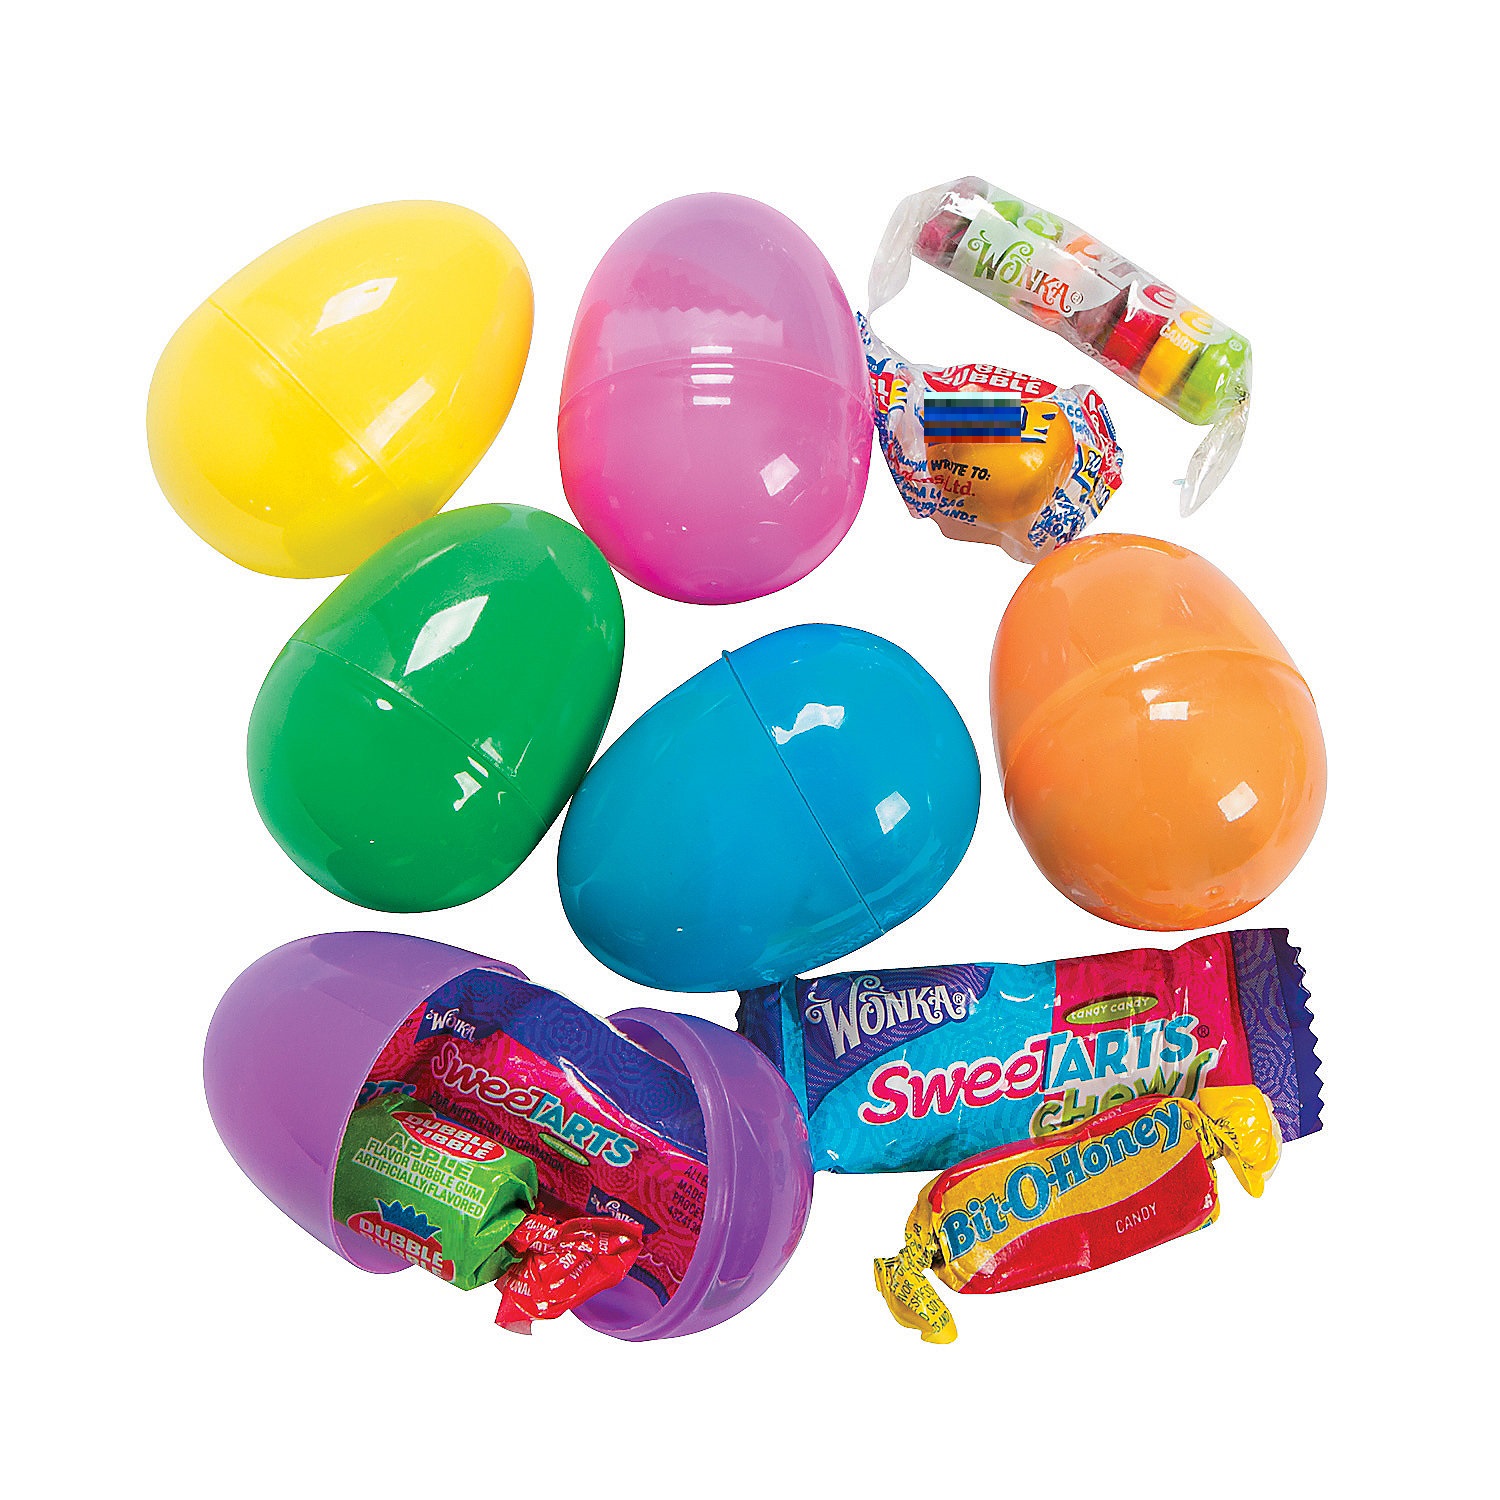 2-1-4-bright-candy-filled-plastic-easter-eggs-24-pc-_37_49